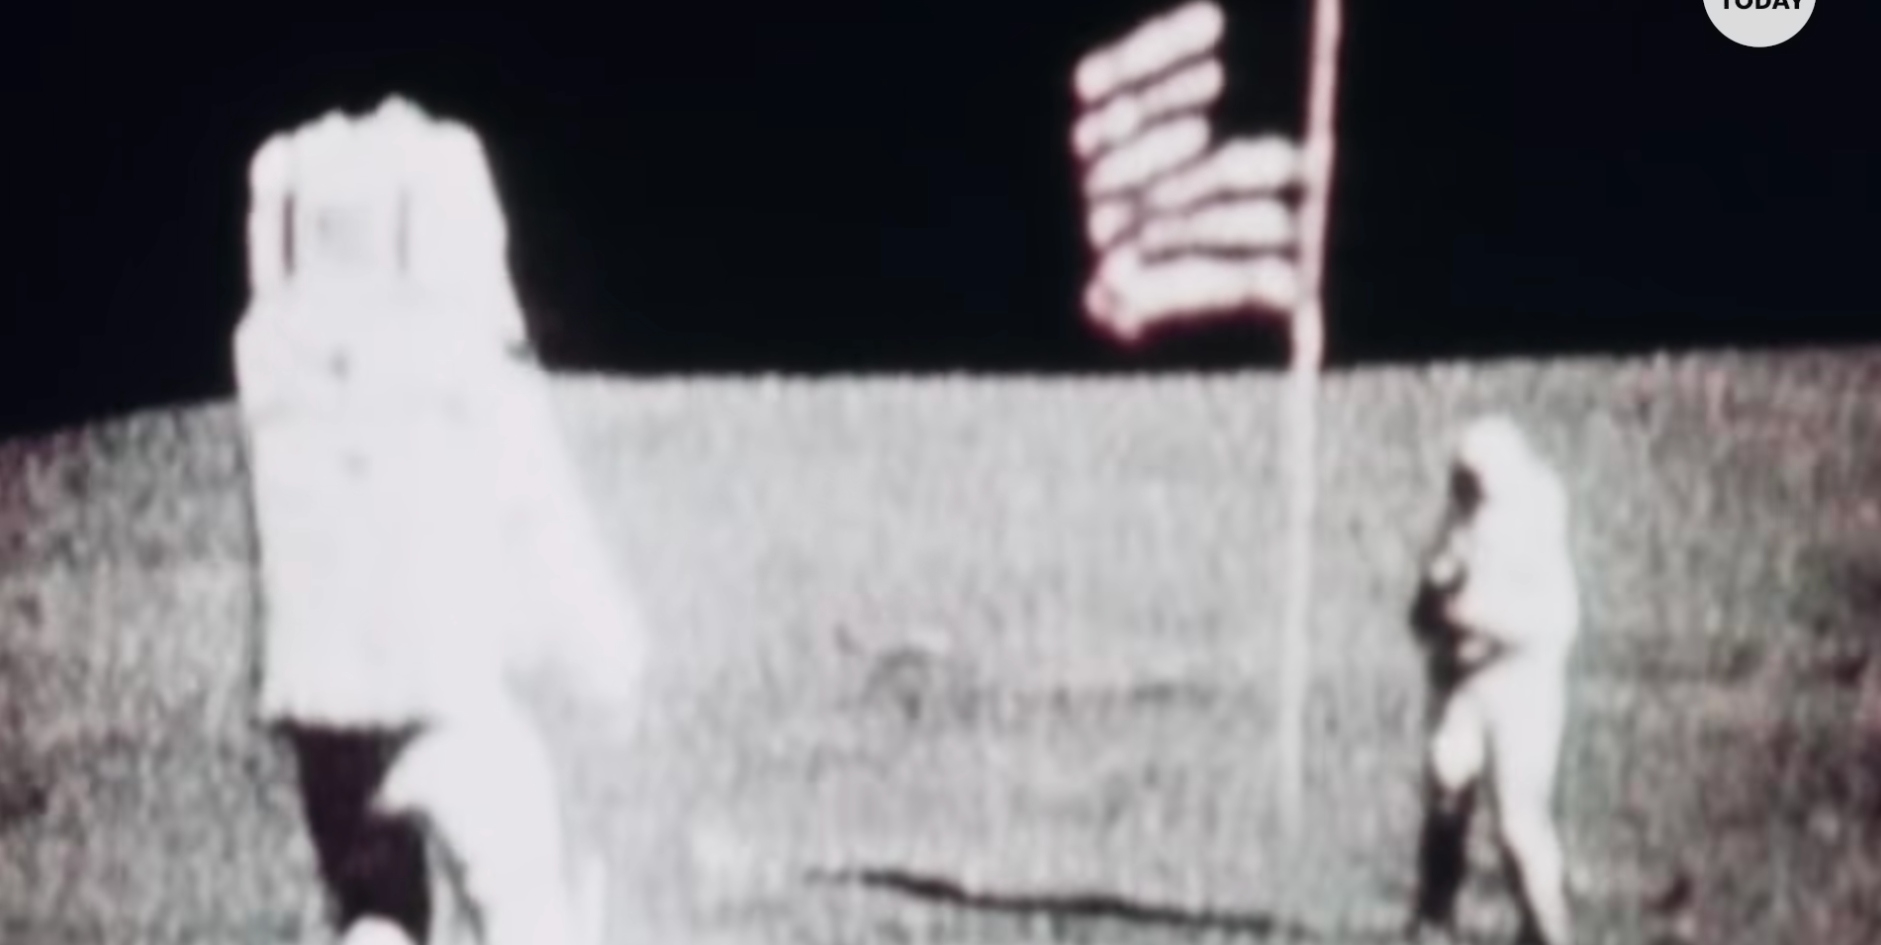 Two astronauts from the Apollo 11 moon landing are standing by the American flag